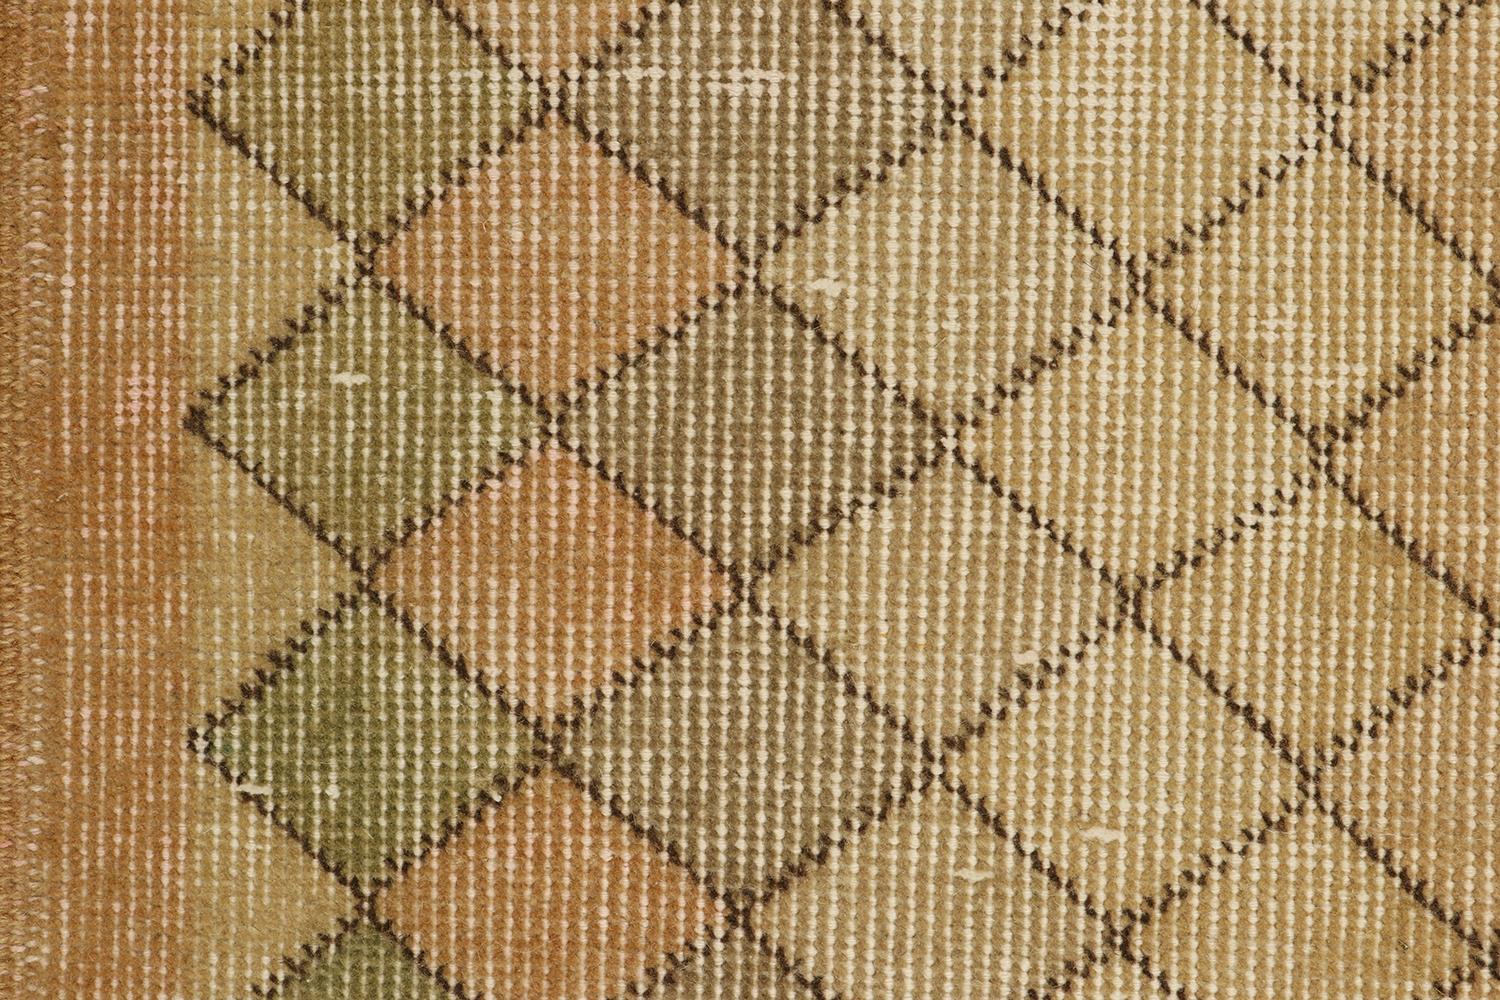 Vintage Zeki Muren Rug in Beige Green Geometric Pattern, by Rug & Kilim In Good Condition For Sale In Long Island City, NY